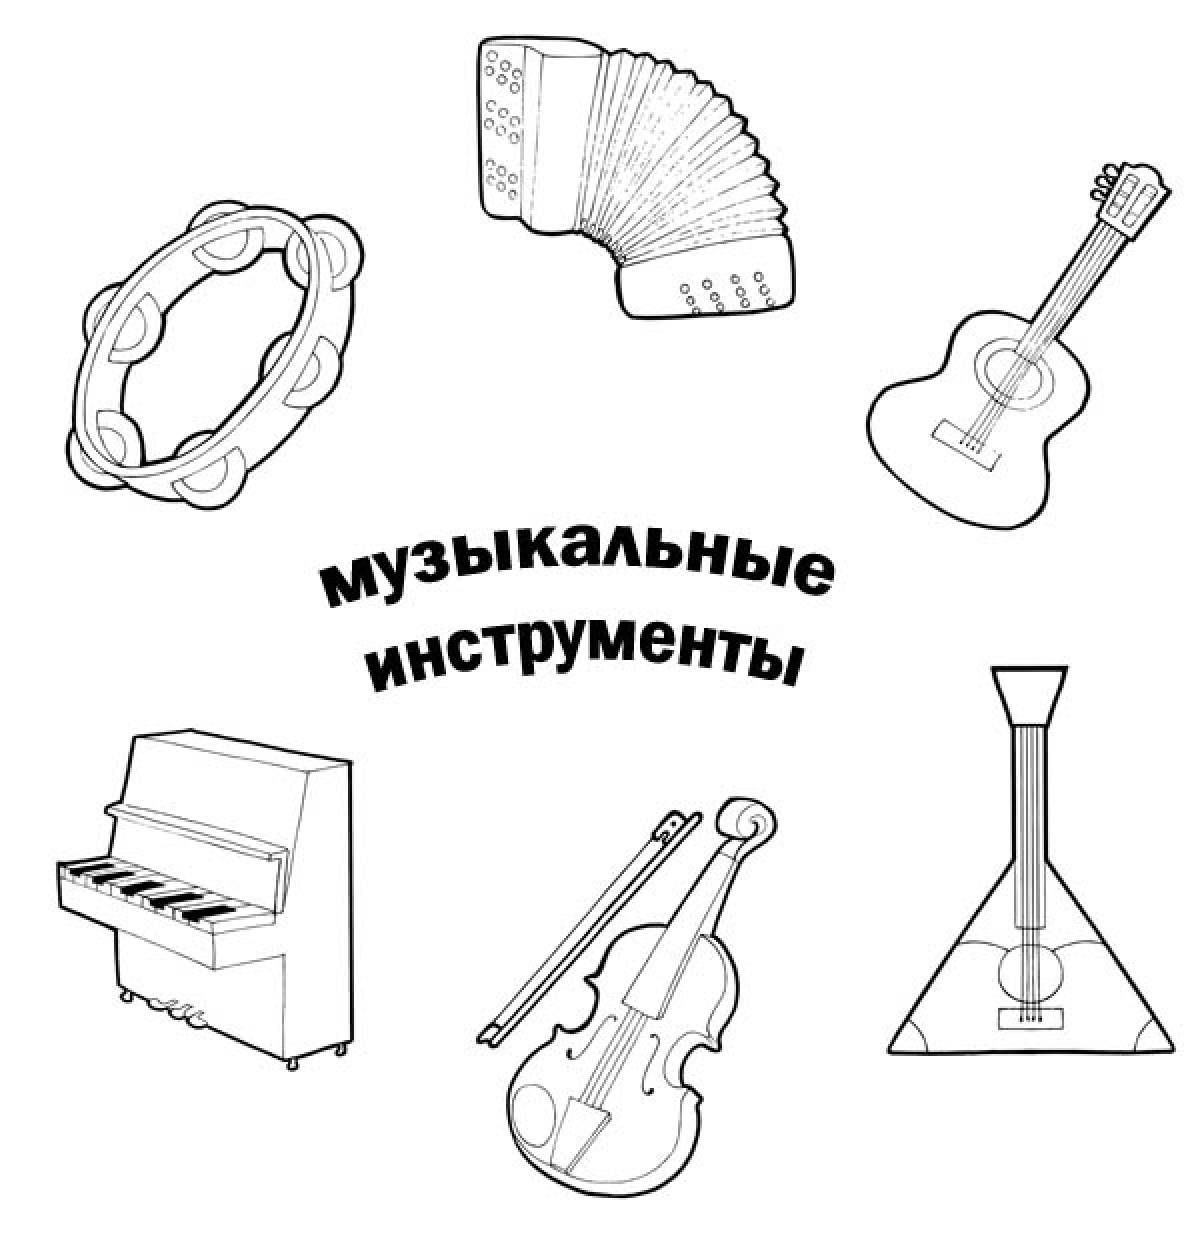 Musical instruments coloring page